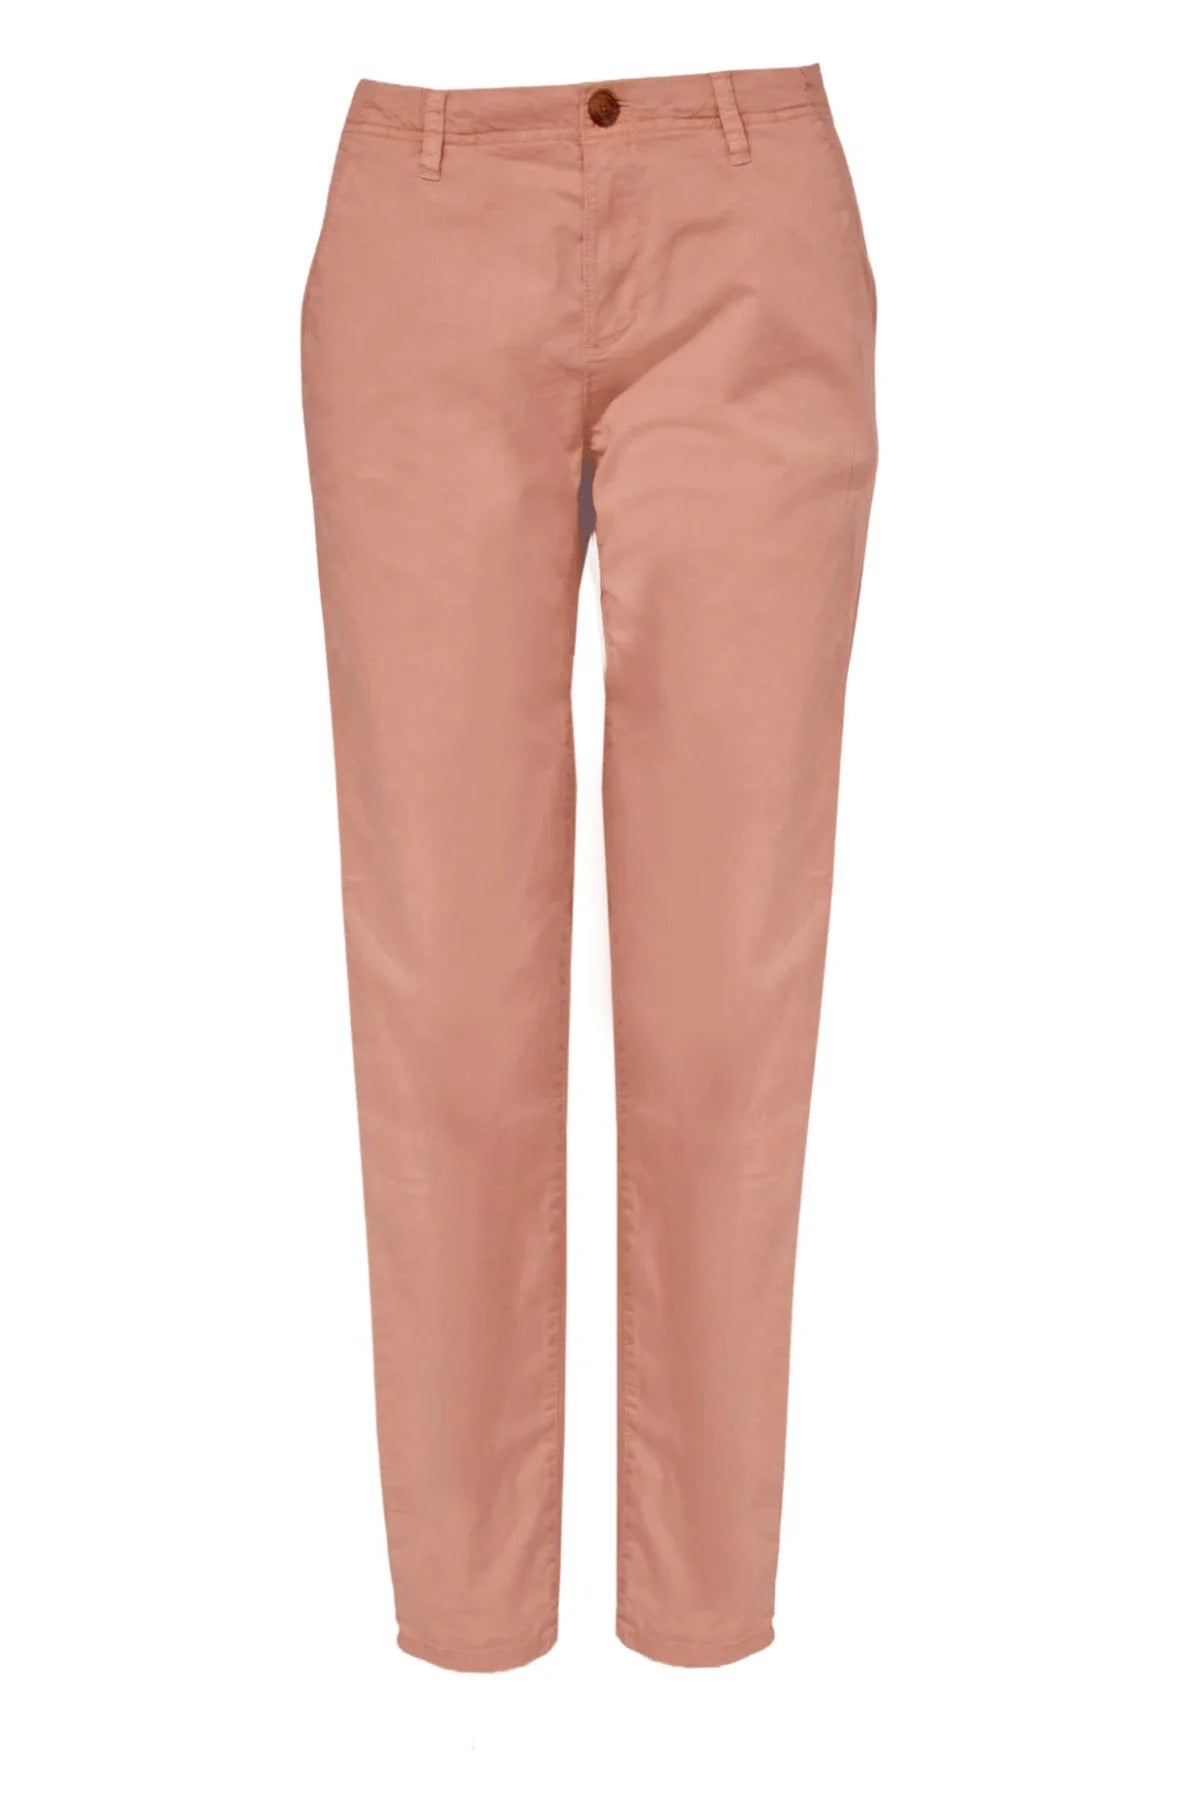 Esprit Stretch Cotton Chino Trousers Peach / 10 / Long